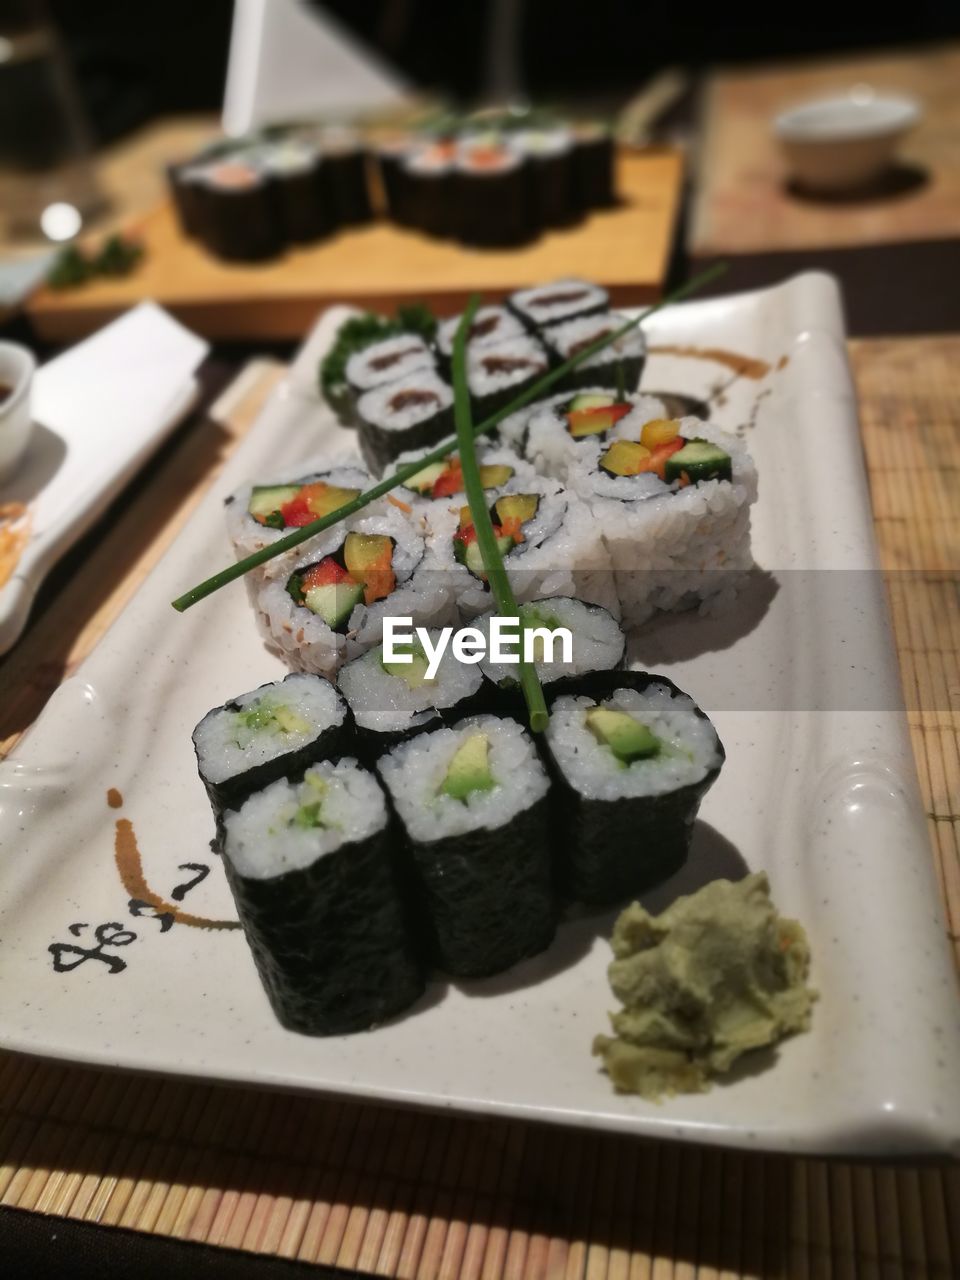 CLOSE-UP OF SUSHI SERVED IN PLATE ON TABLE